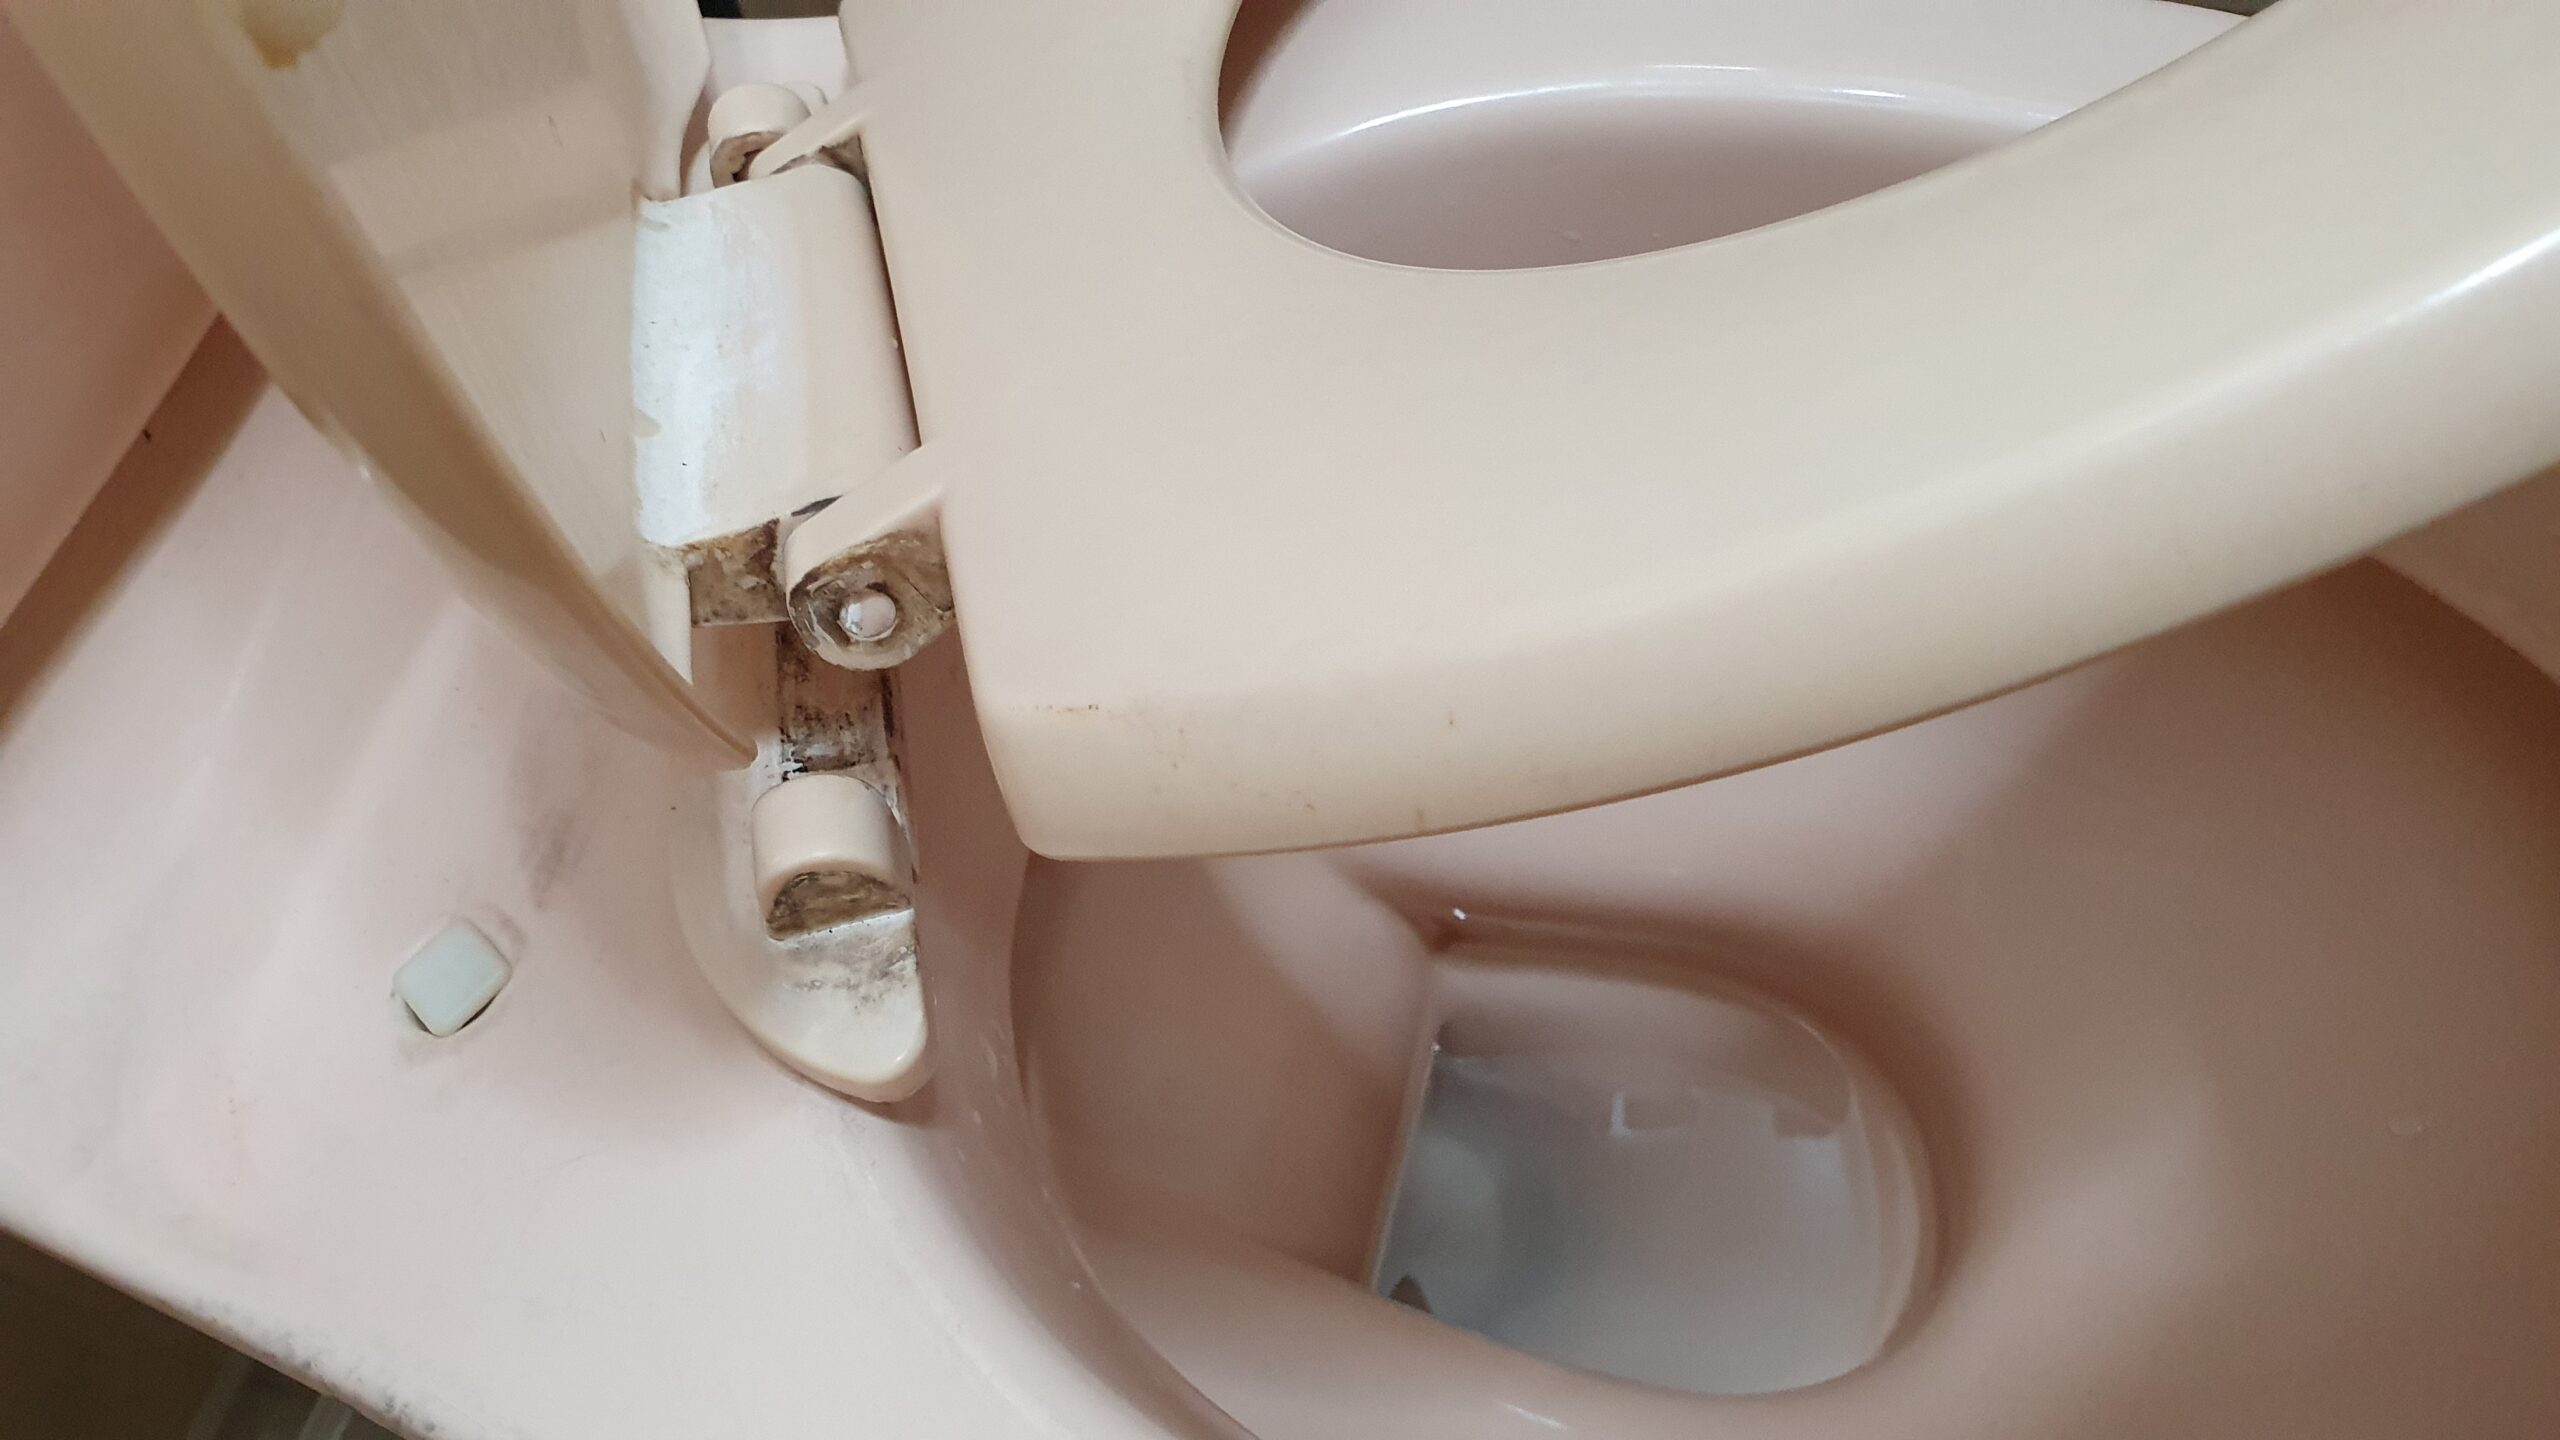 toilet seat and cover - spoilt hinge close up header